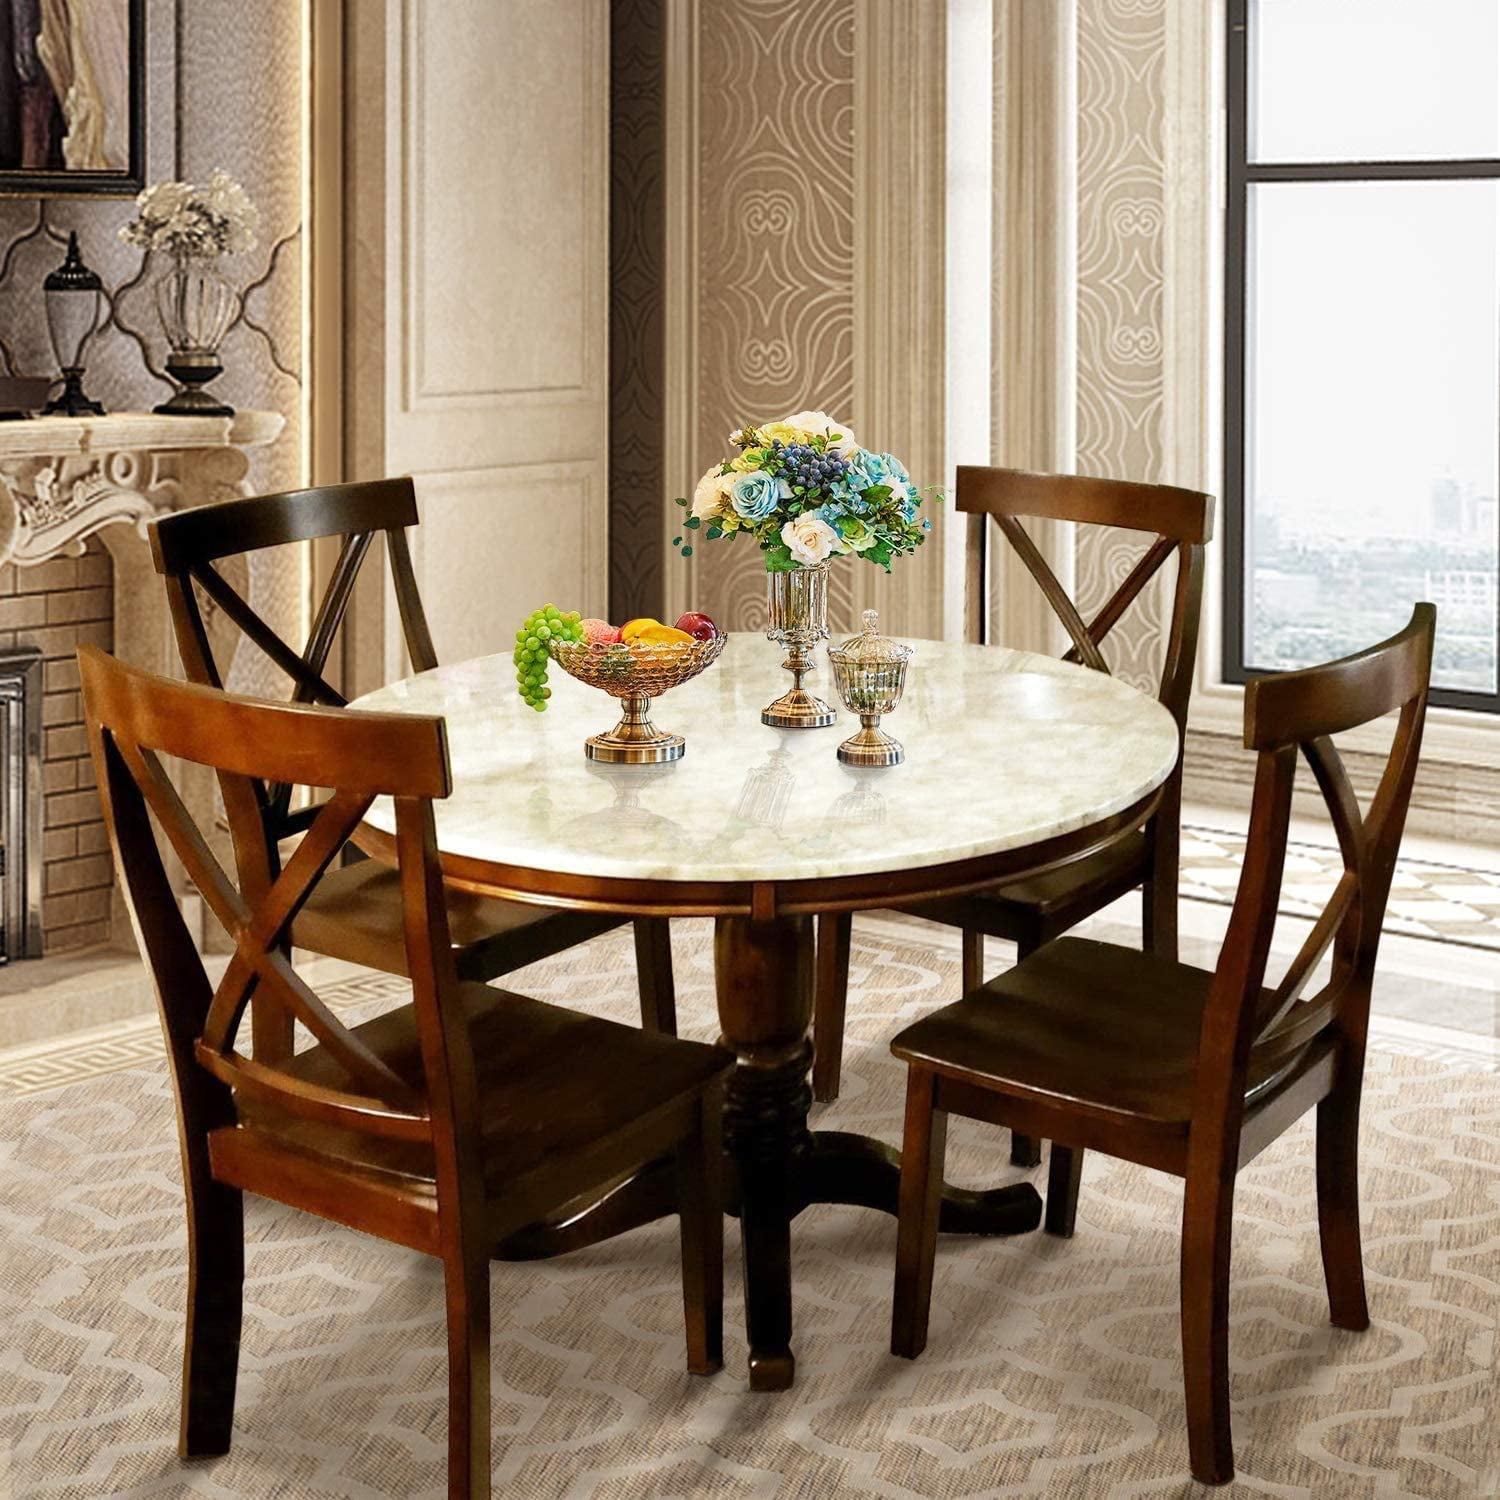 5 PCS Extendable Wood Dining Table Set with Round Table and 4 Upholstered  Chairs, Natural Wood Wash-ModernLuxe